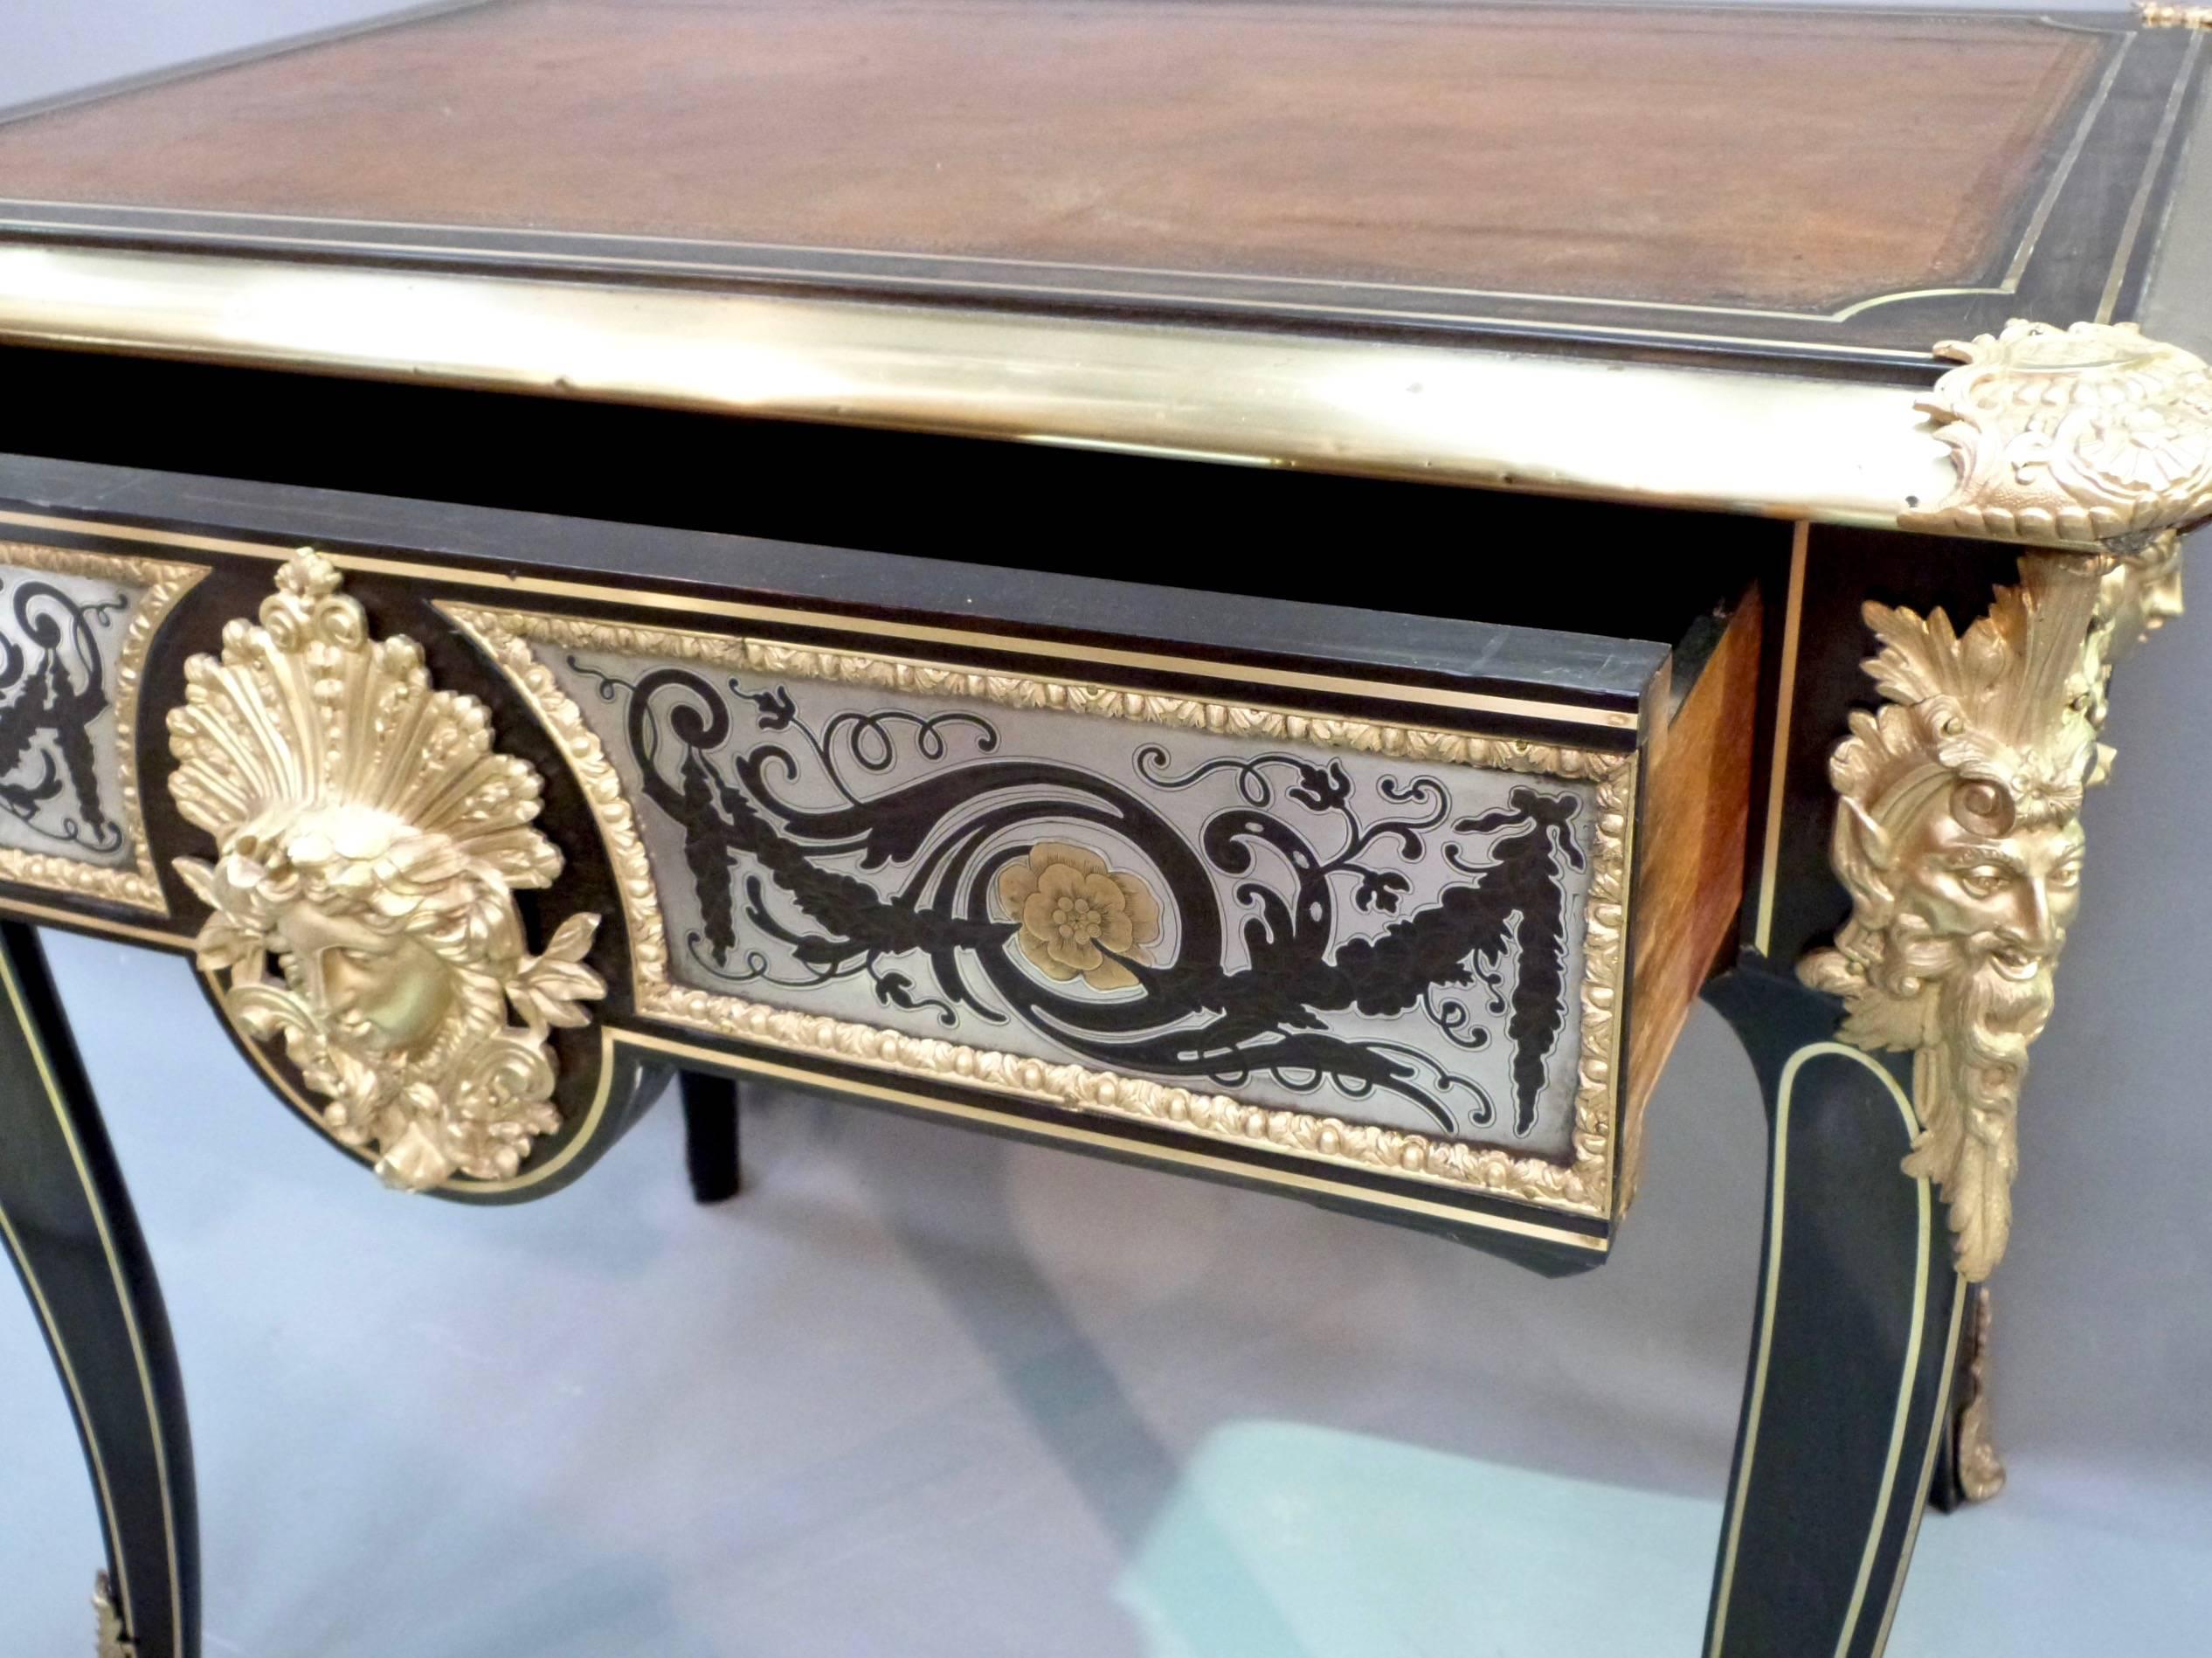 An outstanding 19th century ebony, gilt bronze and pewter writing table. The table features wonderful gilt bronze masks in the French Regence style. Each side has pewter inlaid panels swags and brass flowers. The piece stands on brass inlaid